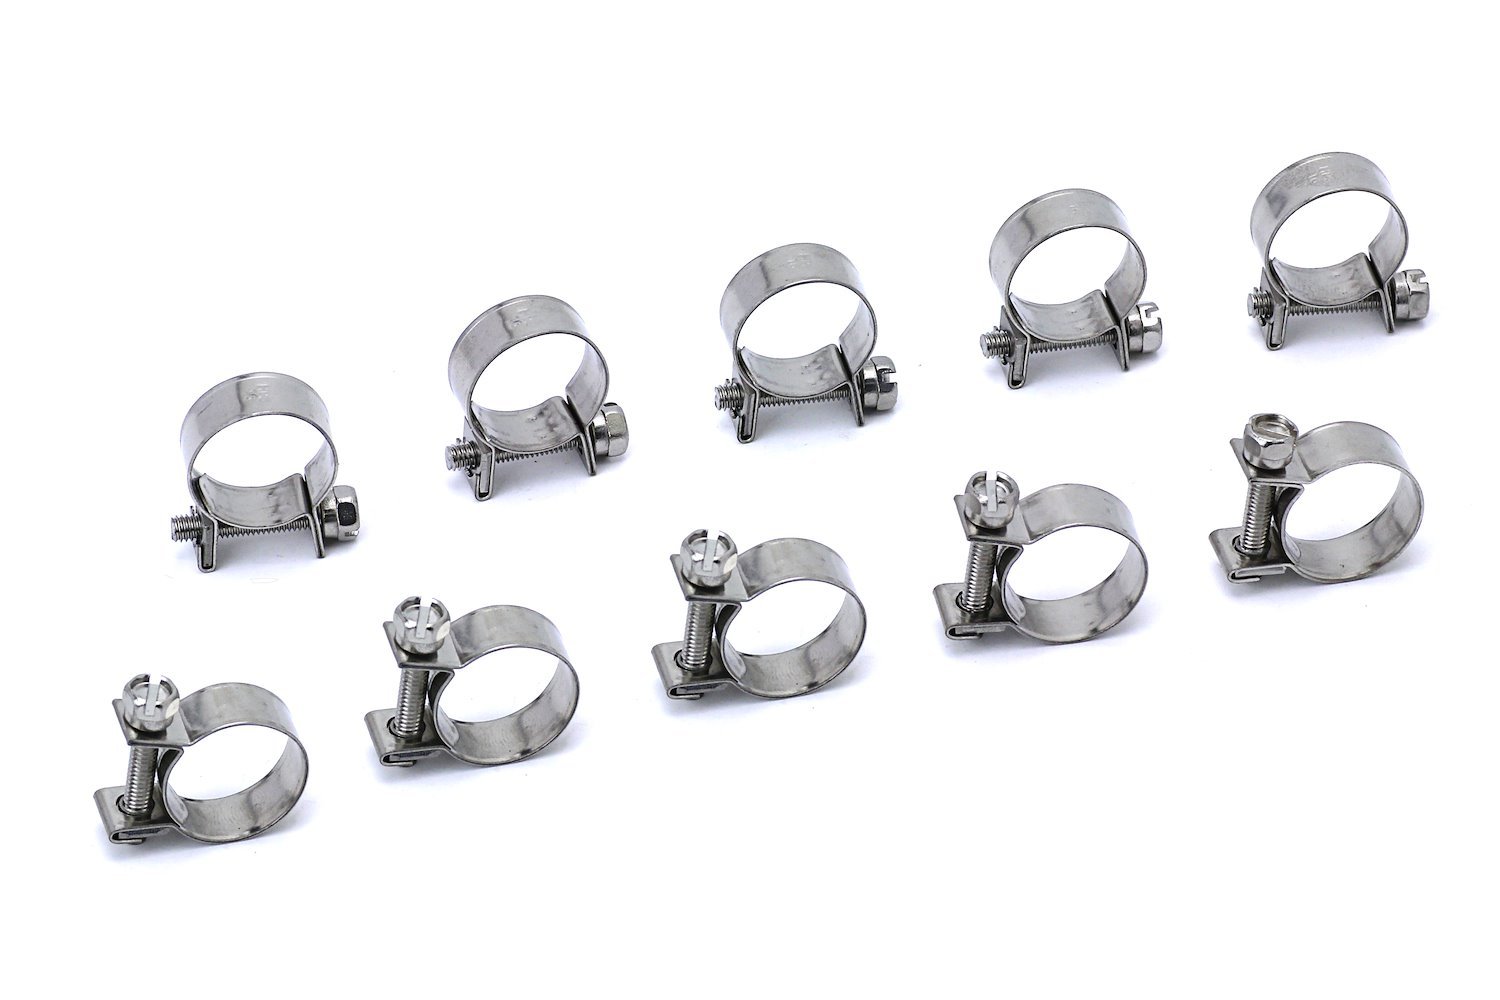 FIC-10x10 Fuel Injection Hose Clamp, 10 Stainless Steel Small Hose Clamps, SAE Size 12, 25/64 in. - 15/32 in. (10 mm-12 mm)